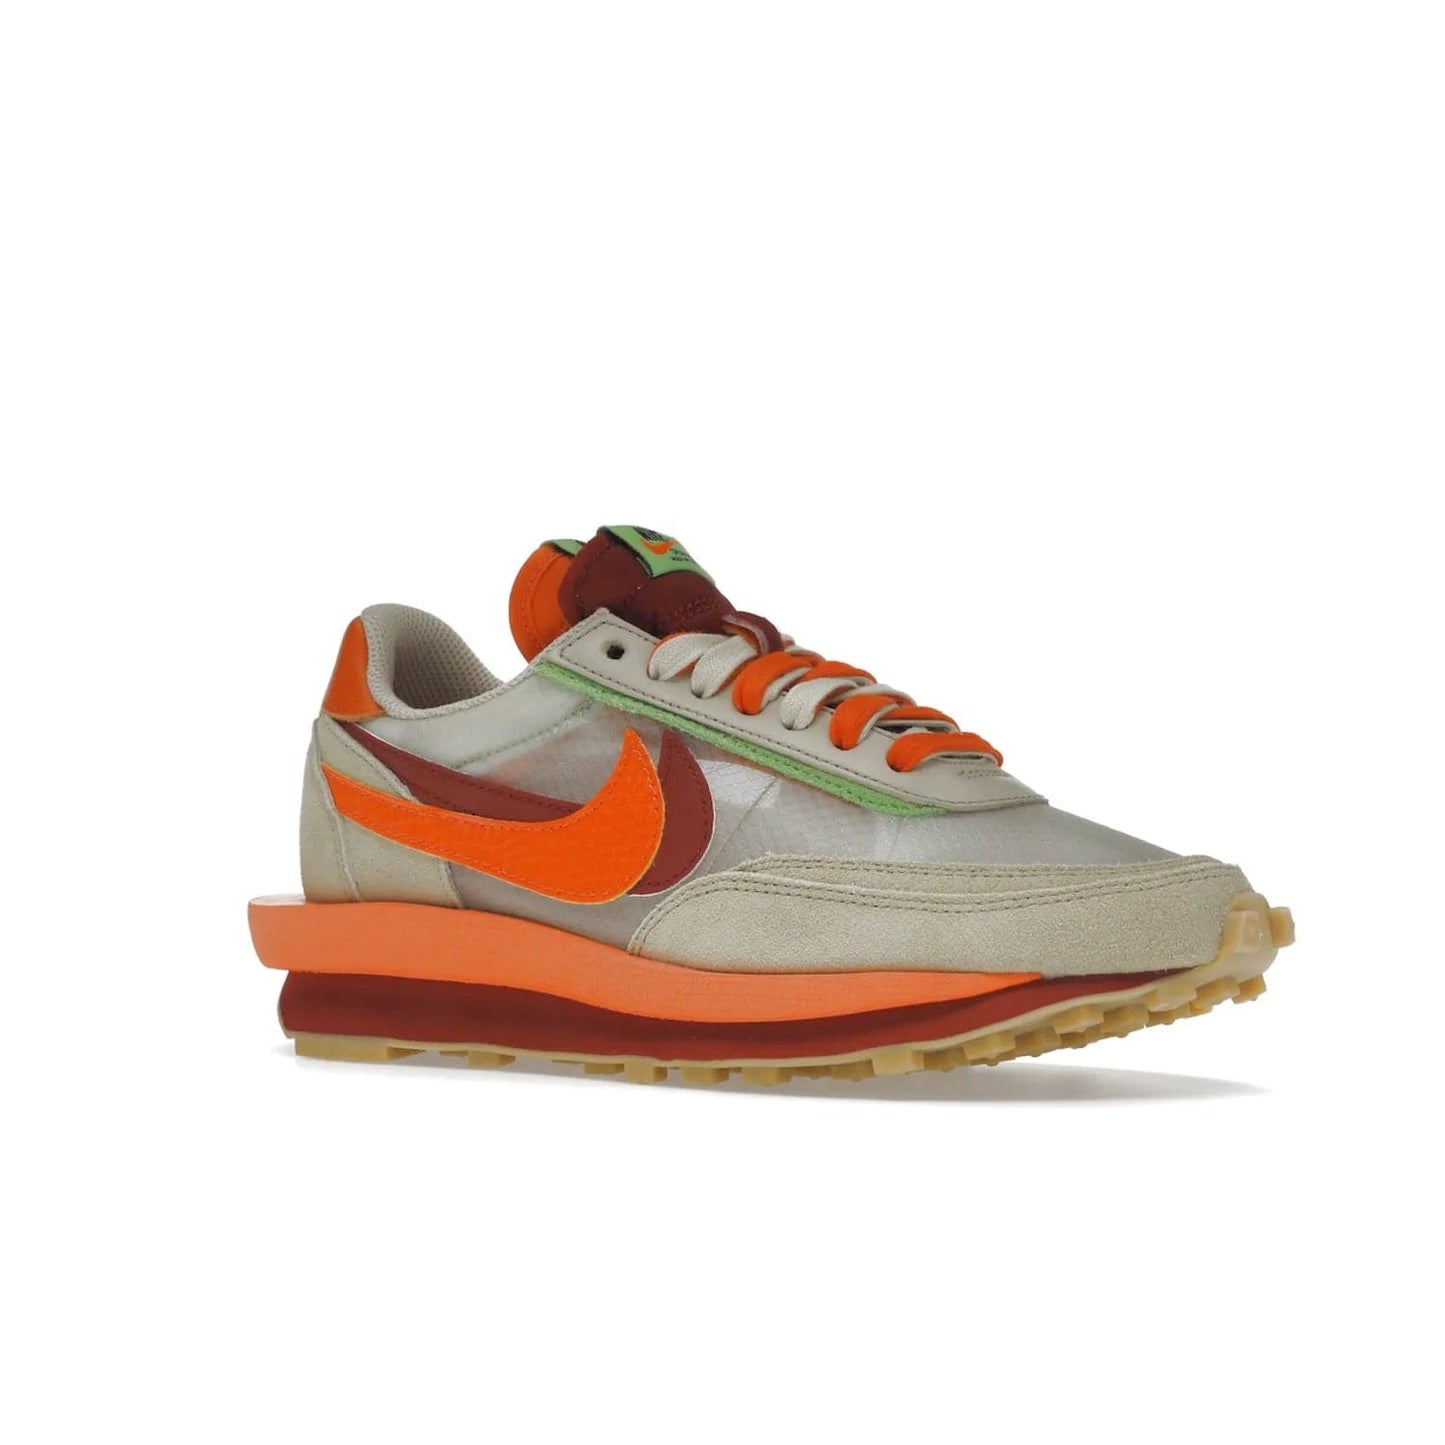 Nike LD Waffle sacai CLOT Kiss of Death Net Orange Blaze - Image 4 - Only at www.BallersClubKickz.com - A bold and stylish Nike LD Waffle sacai CLOT Kiss of Death Net Orange Blaze sneaker featuring a unique off-white, Deep Red & Orange Blaze Swooshes, two-toned stacked sole and doubled tongue. Available in September 2021. Make a statement.